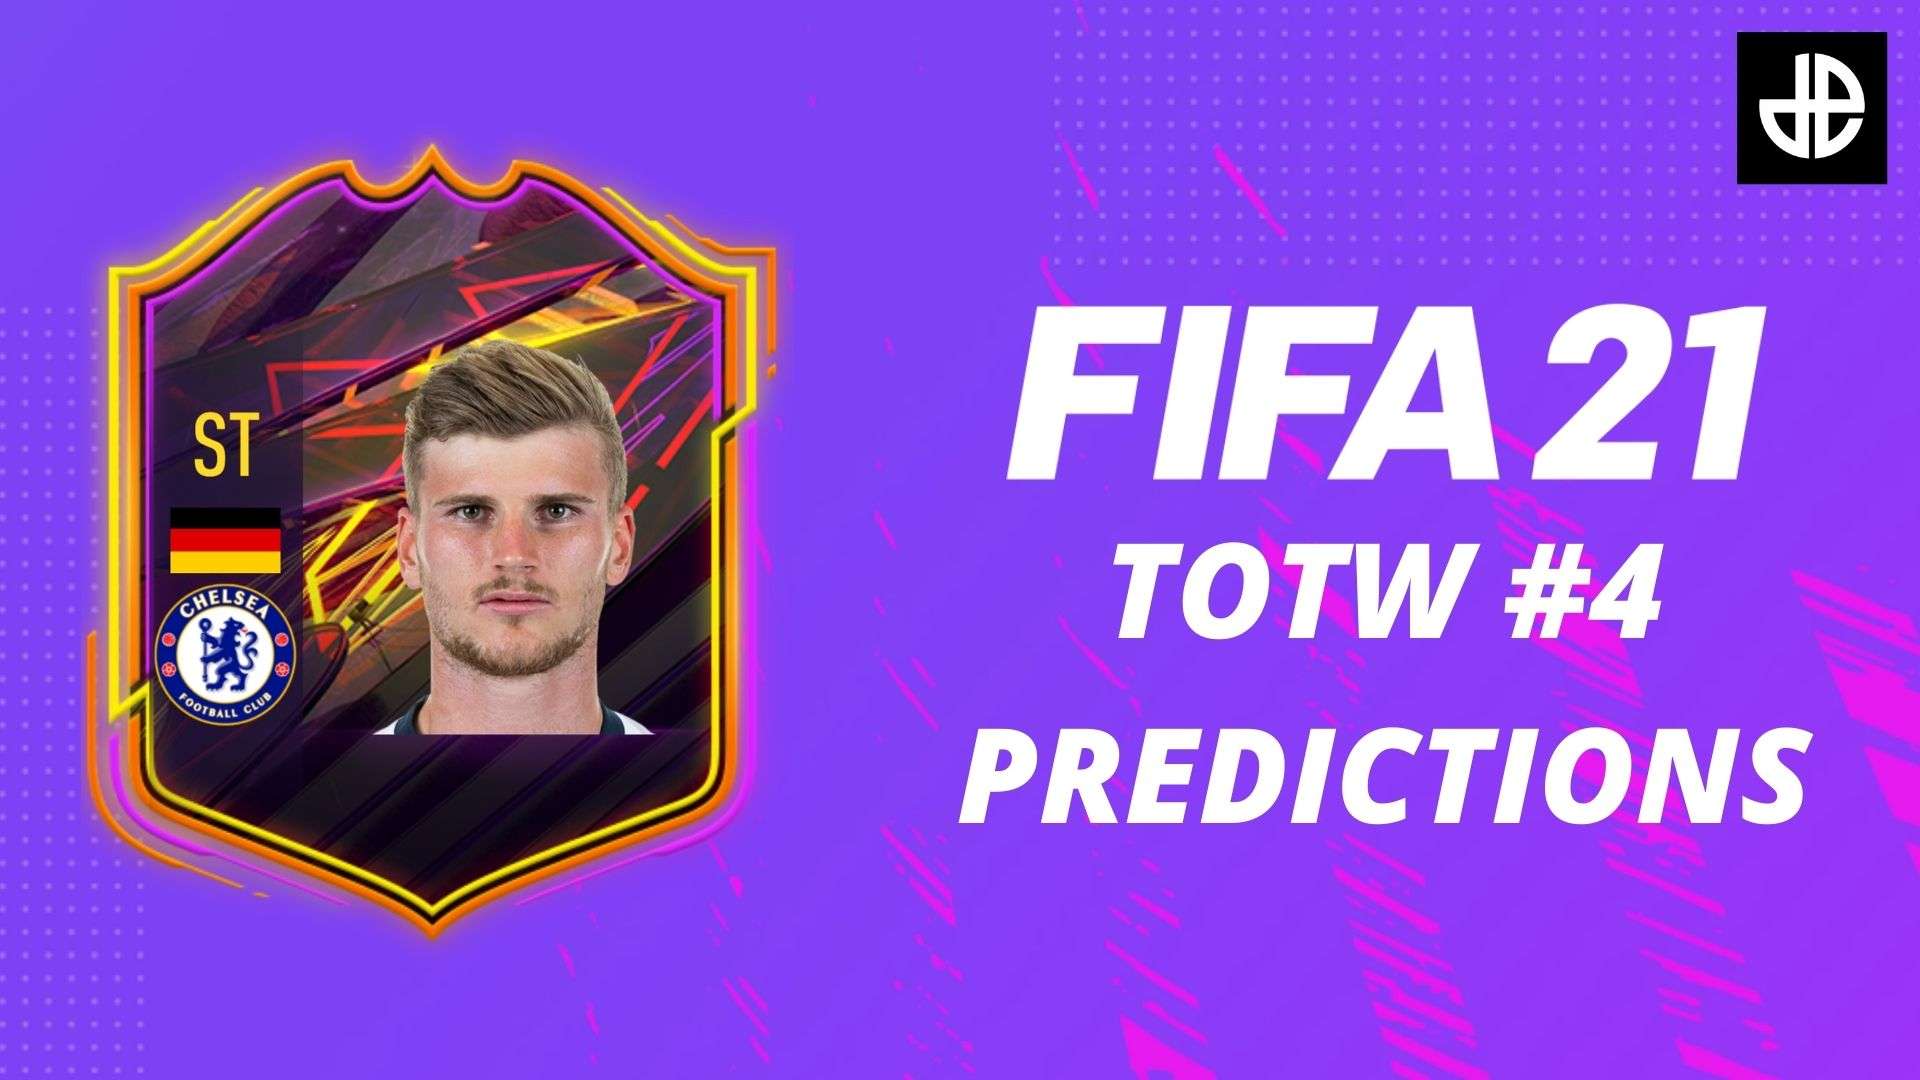 Timo Werner OTW FIFA 21 card with a purple background